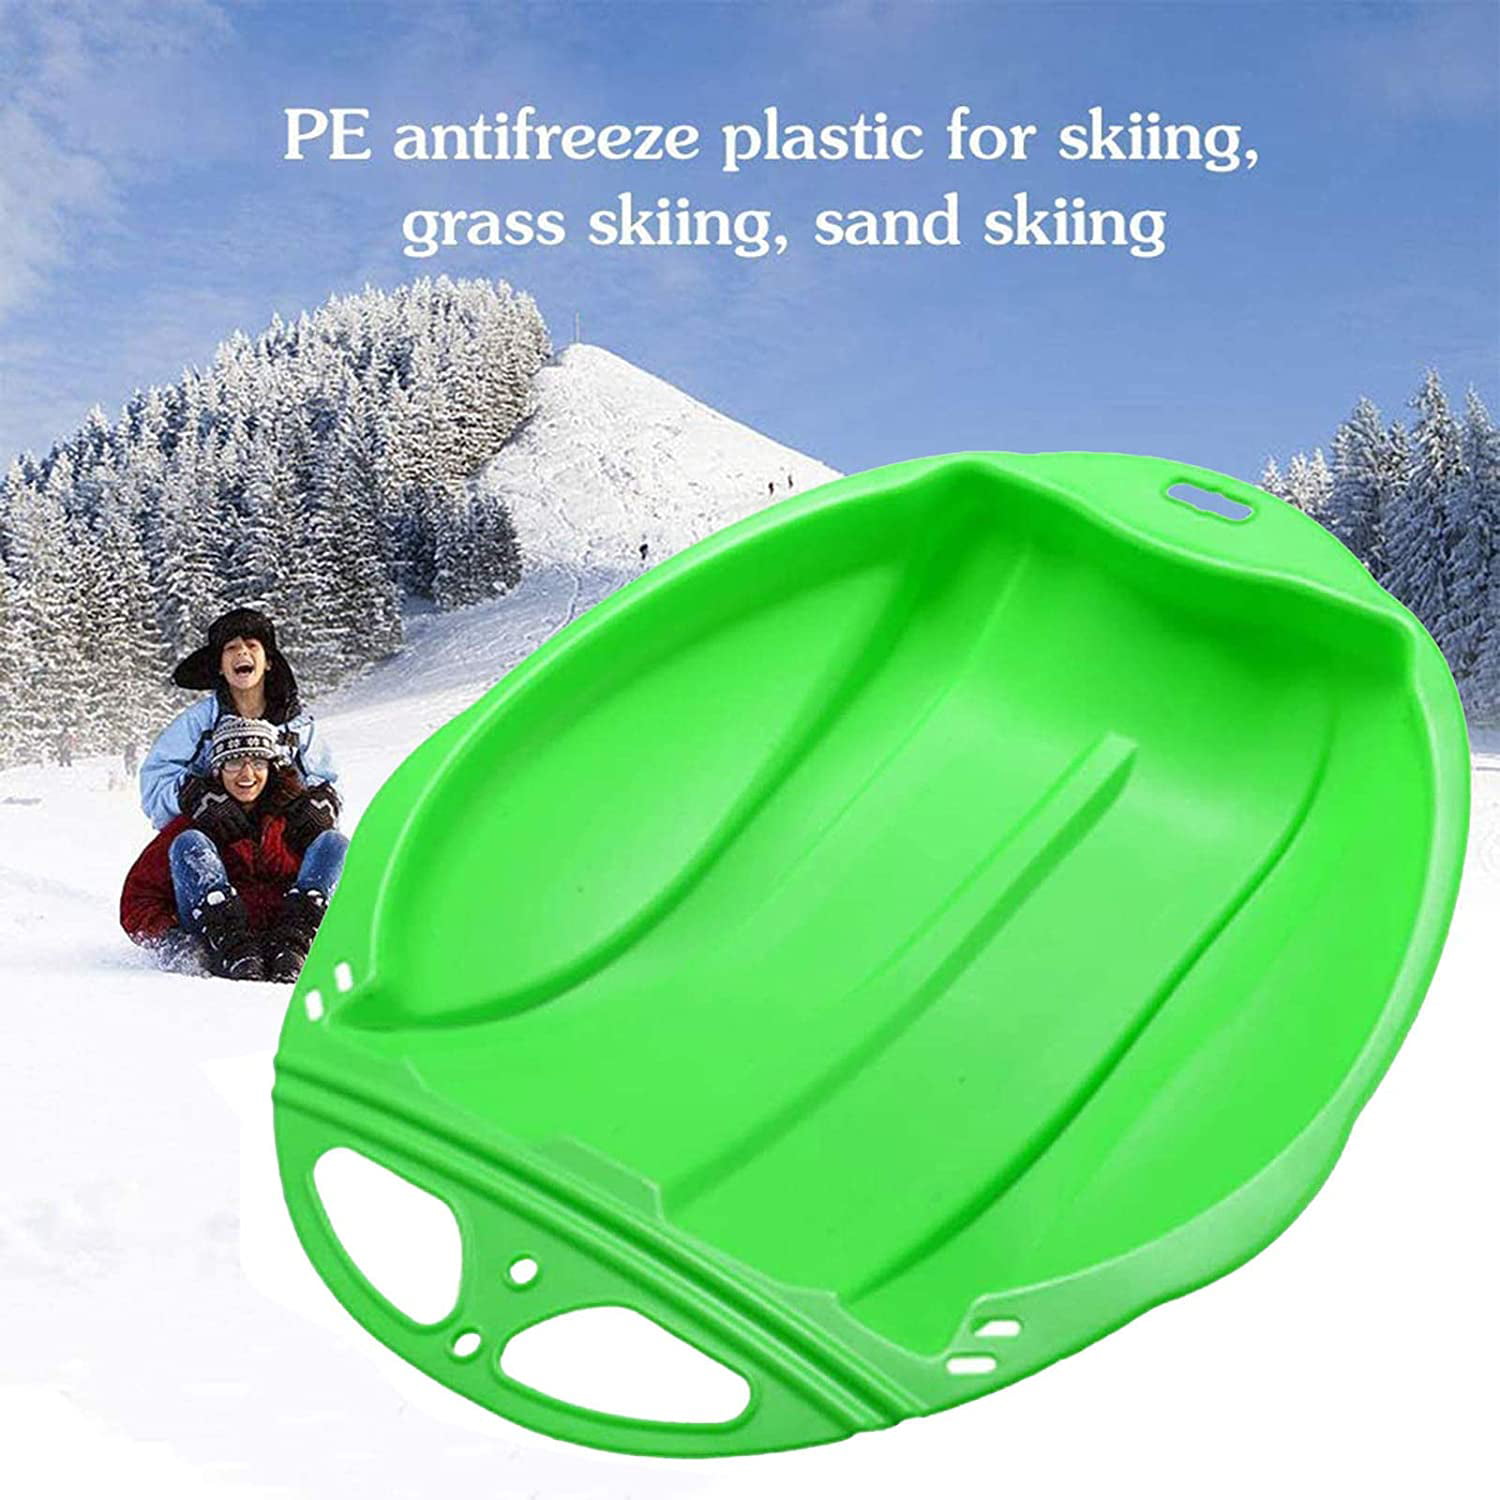 Snow Sled Board Downhill Sled Winter Outdoor,Plastic Cold Resistant Skiing Boards Snow Grass Sand Board Ski Pad for Kids & Adult